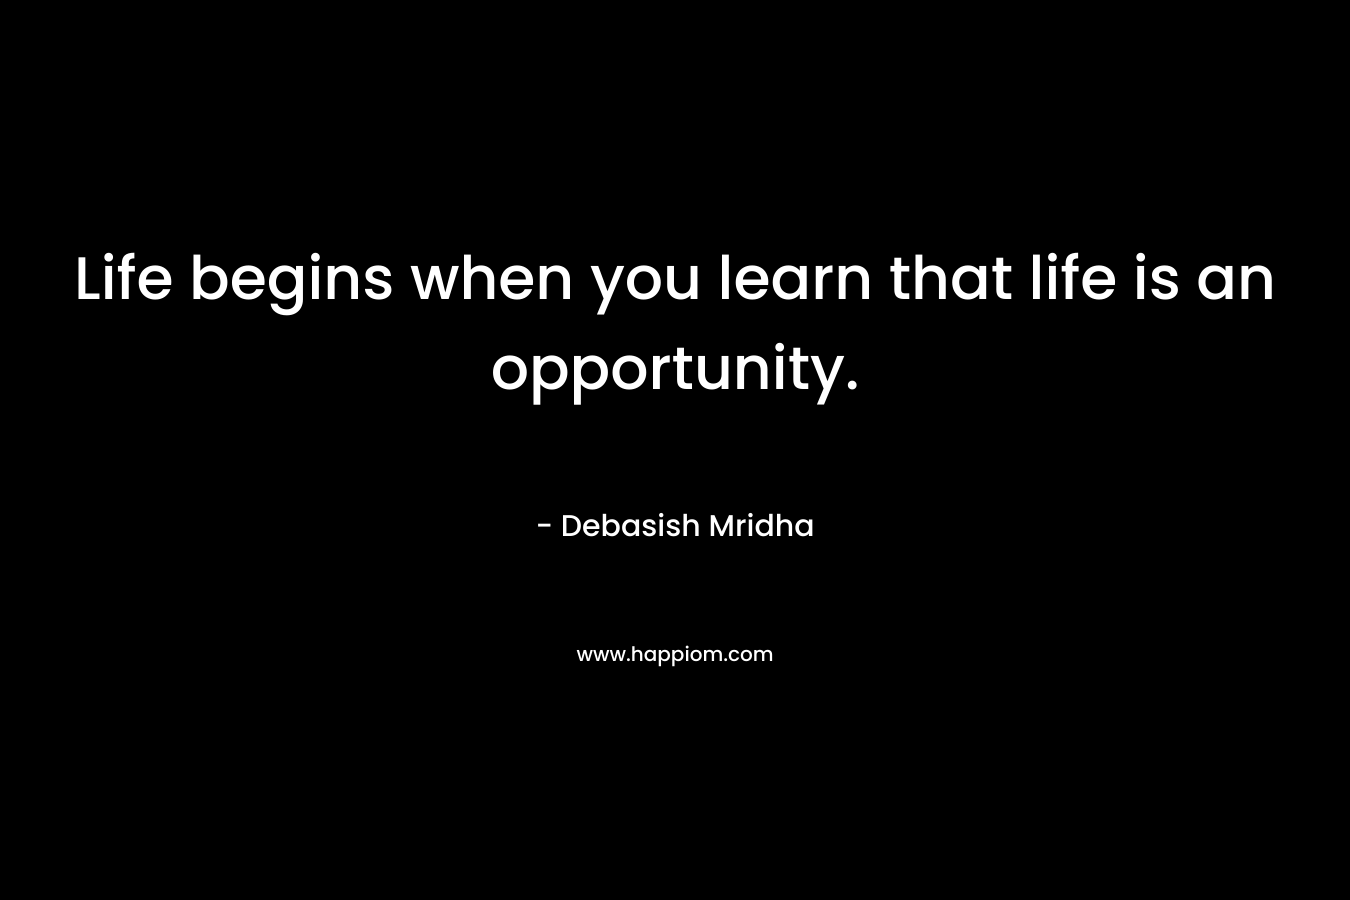 Life begins when you learn that life is an opportunity.